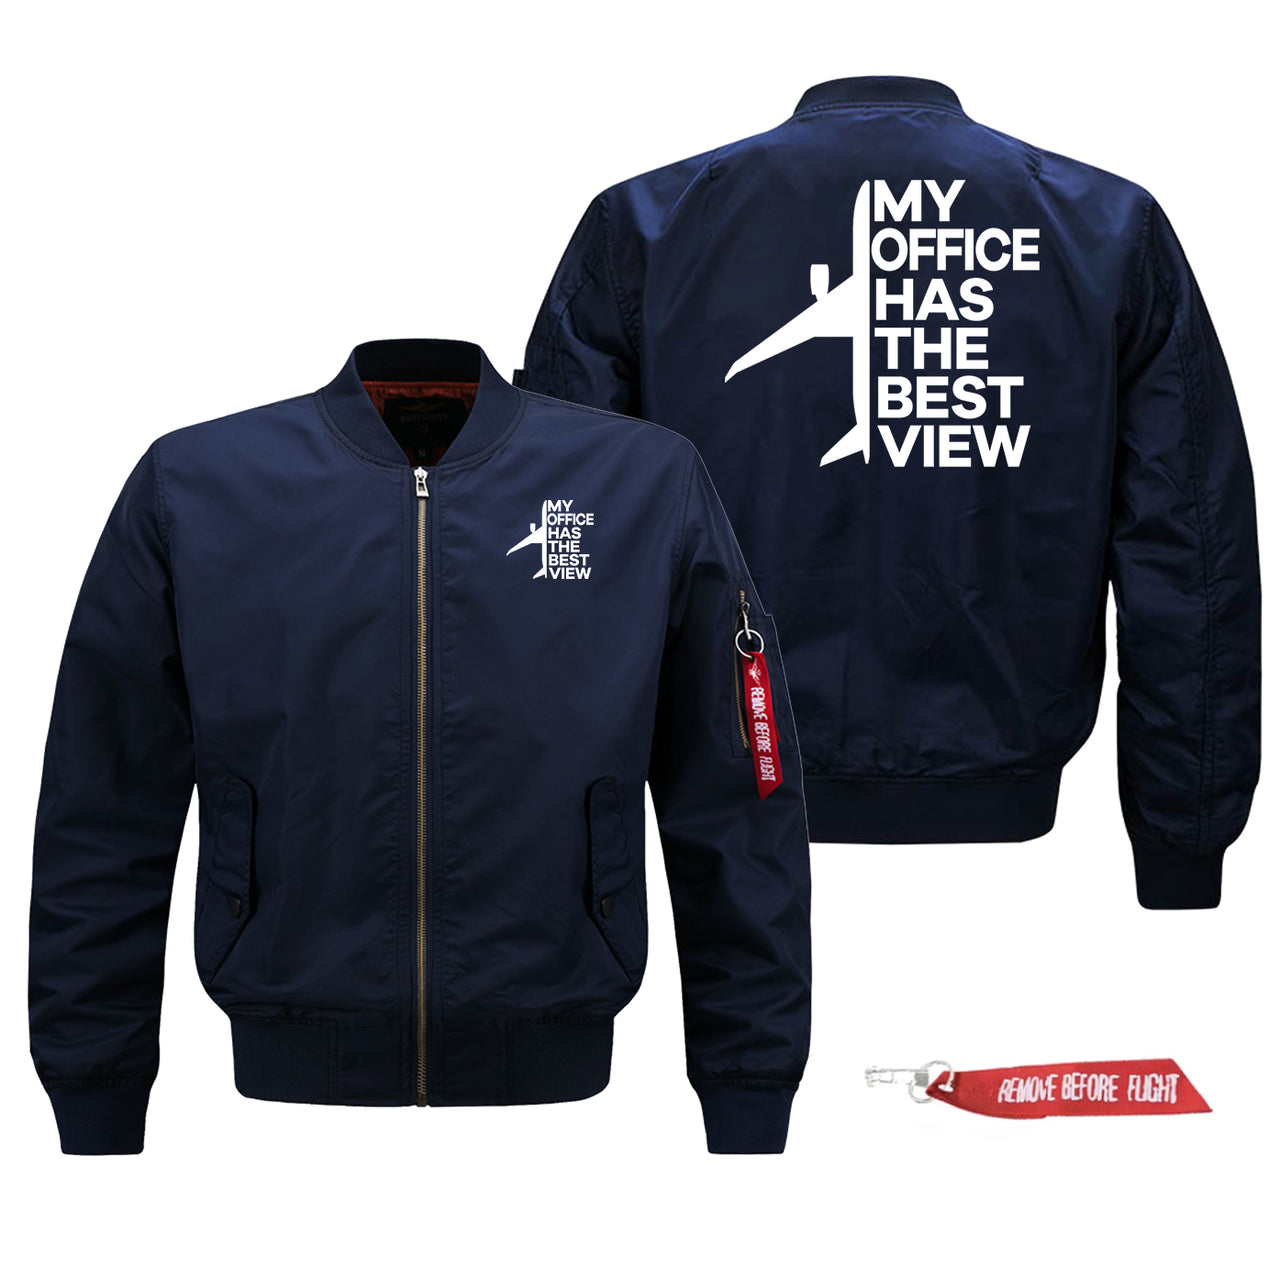 My Office Has The Best View Designed Pilot Jackets (Customizable)